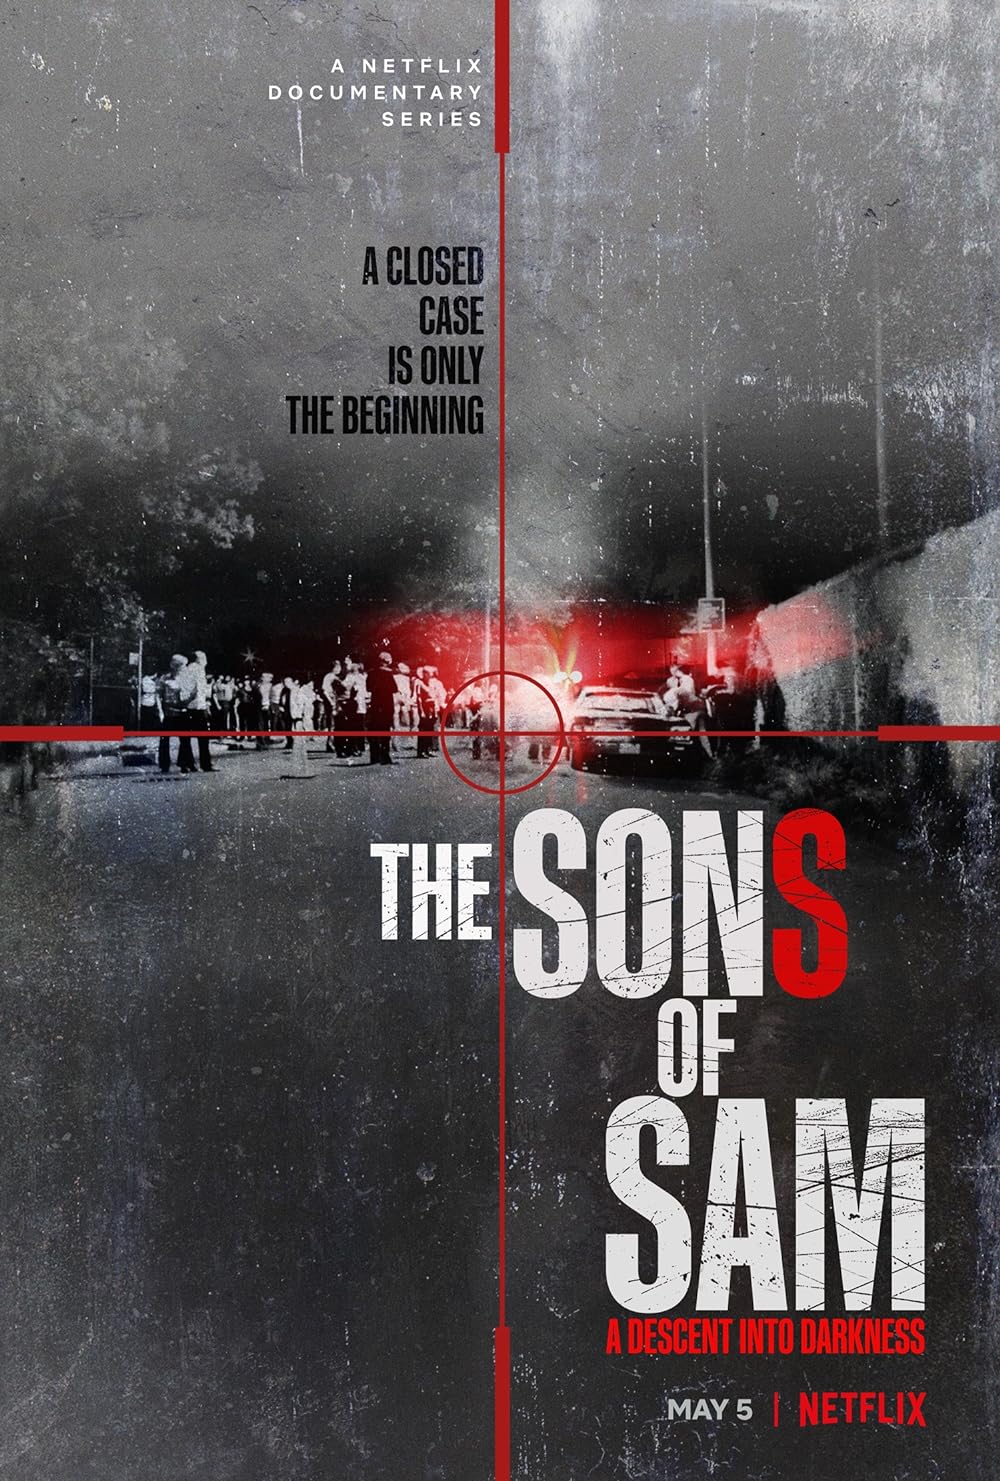 The Sons of Sam: A Descent into Darkness (2021) S1 EP4 Rabbit Hole 448Kbps 23.976Fps 48Khz 5.1Ch DD+ NF E-AC3 Turkish Audio TAC[